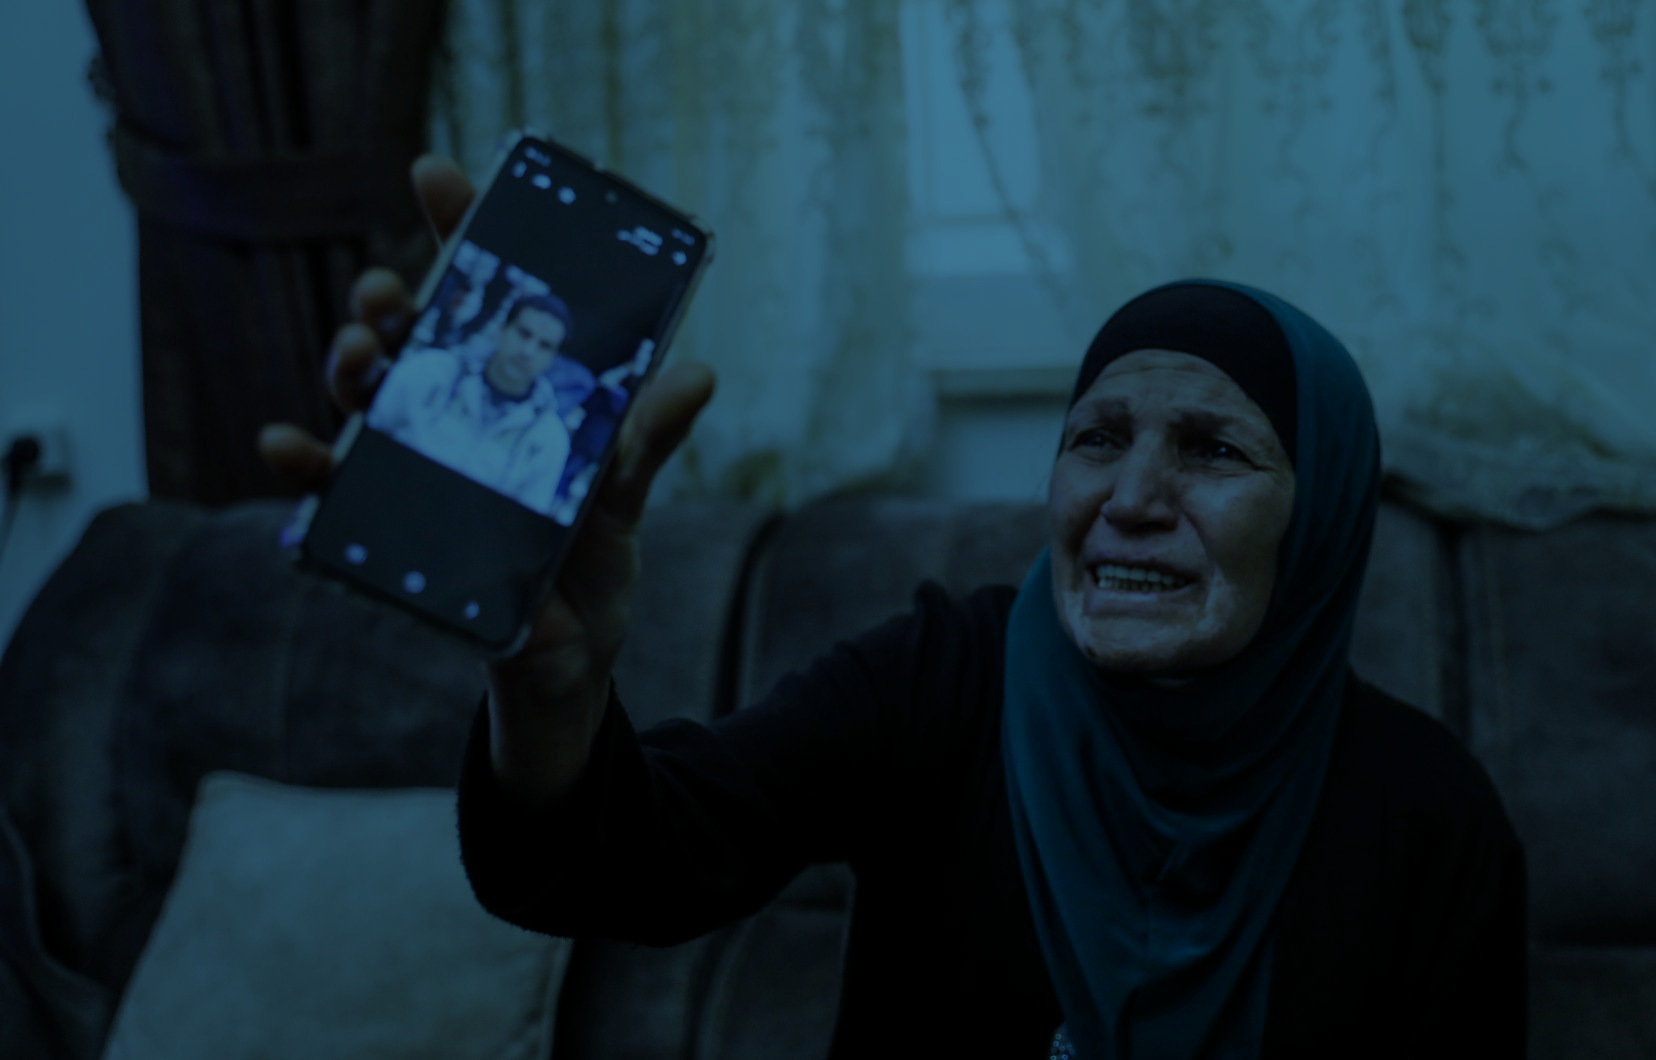 Palestinian mother to UNHRC: ‘Don’t forget my son, anyone can be the next victim’